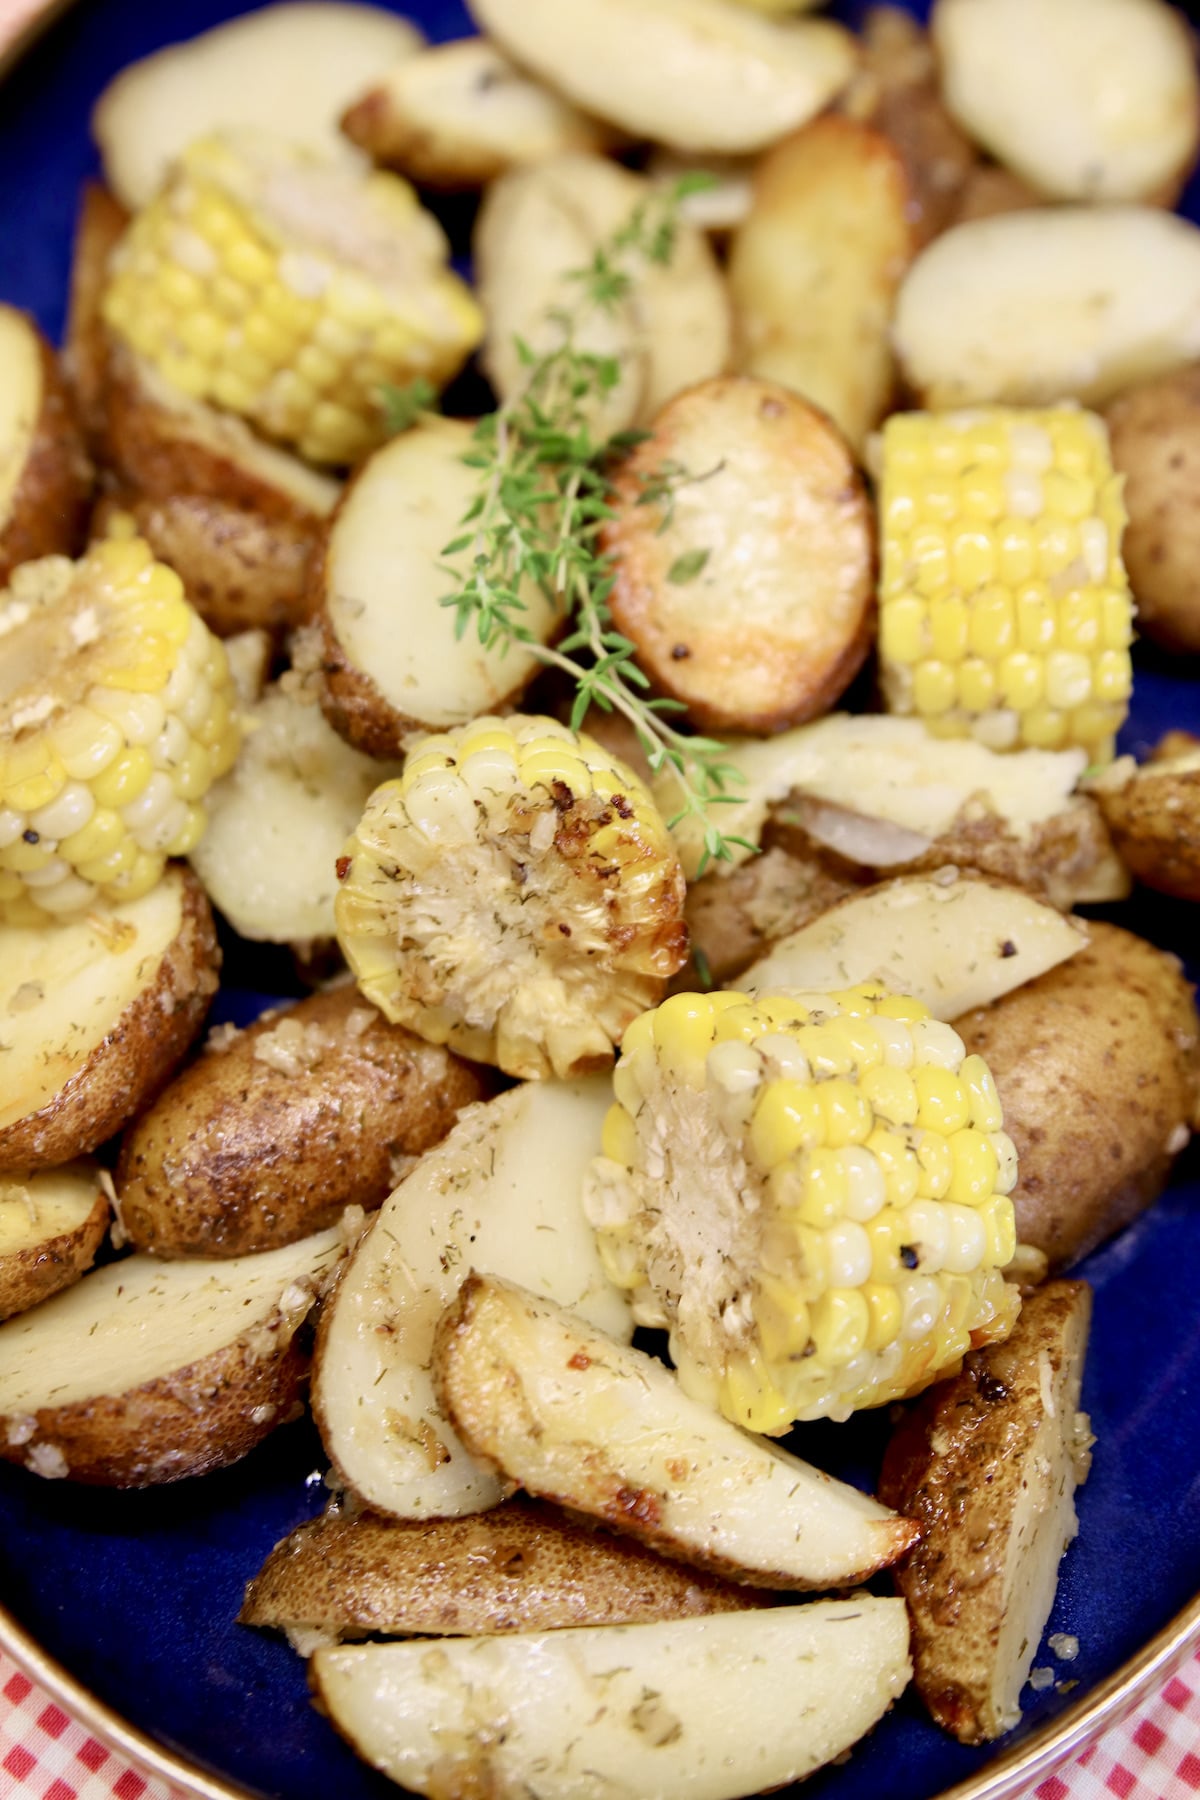 Grilled Potatoes with corn on the cob.